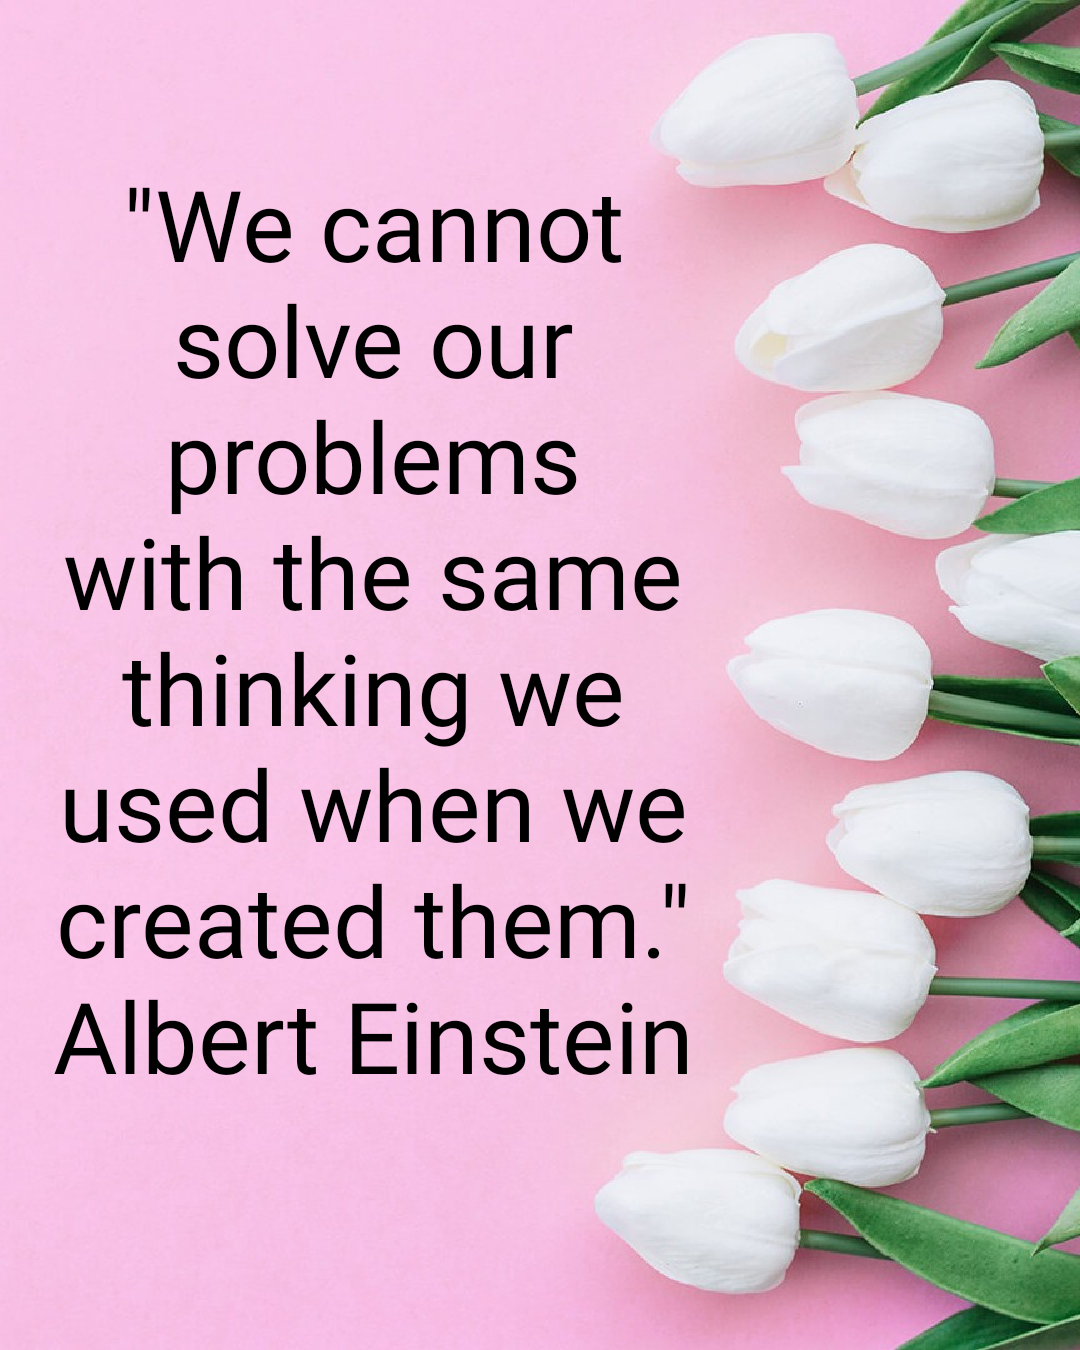 Quote 2 - We cannot solve our problems with the same thinking we used when we created them.